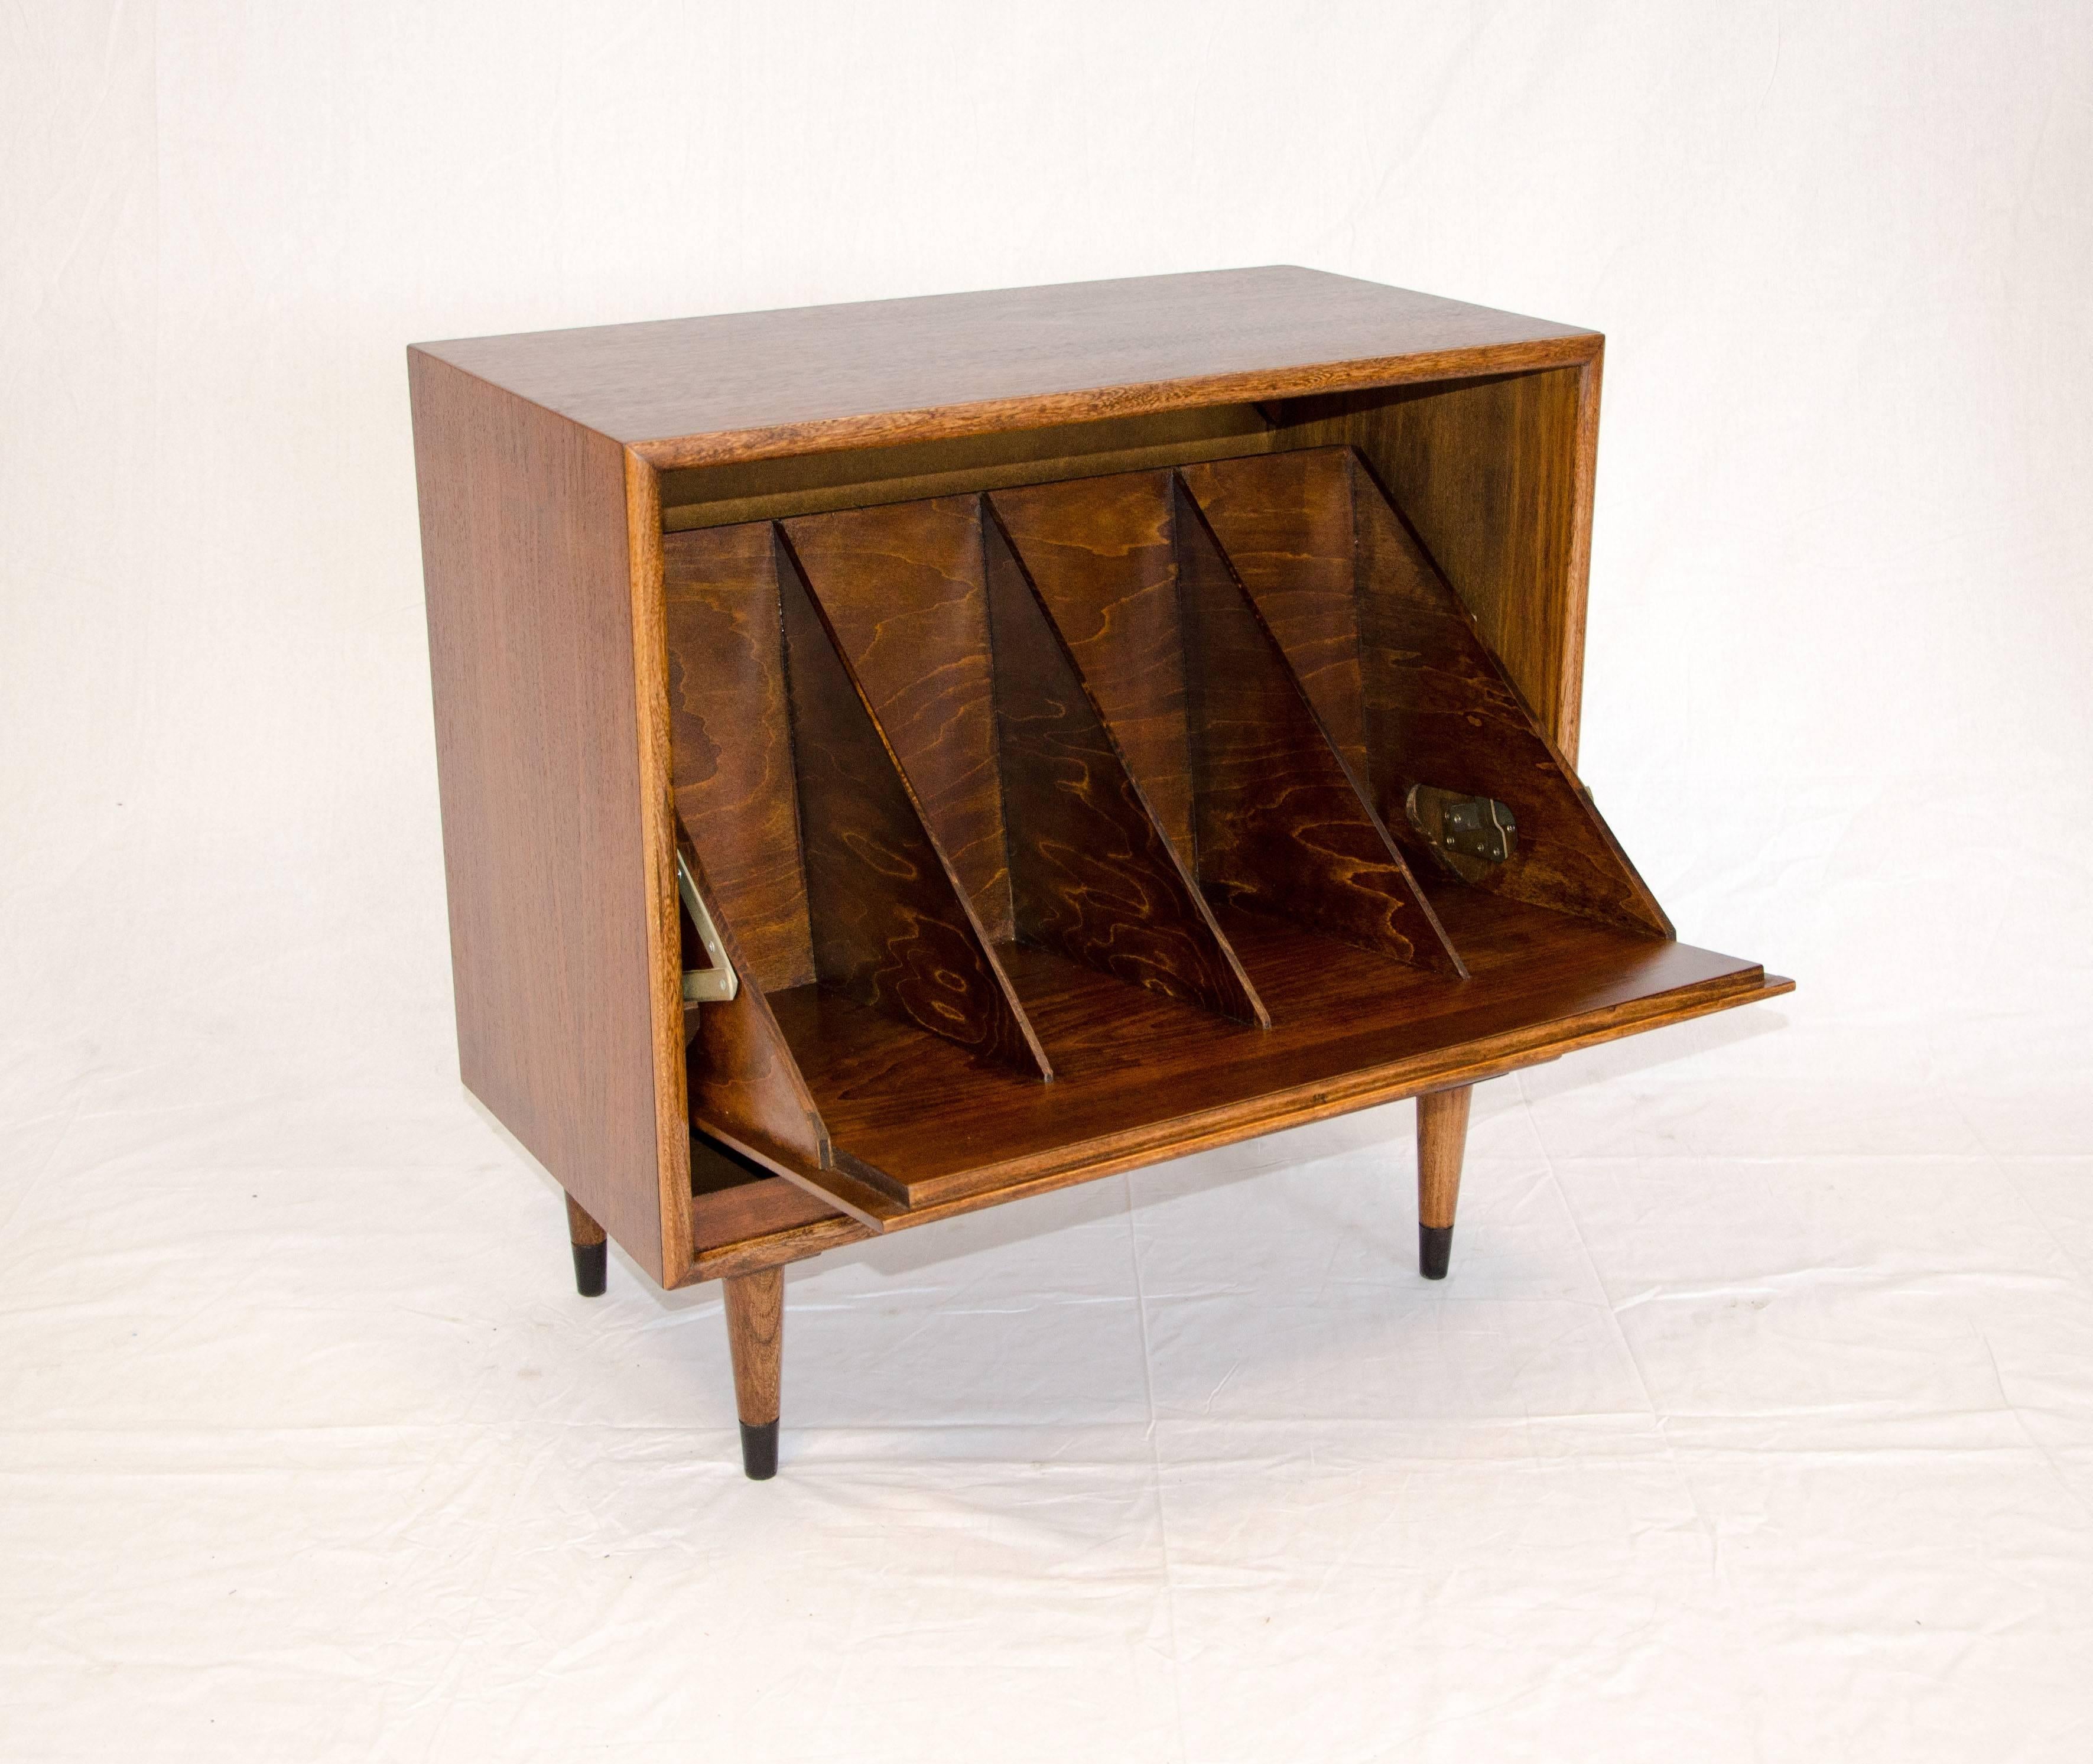 Unusual record storage cabinet with the signature Lane of Altavista, VA walnut drawer fronts accented with oak dovetail patterns on both sides. The top drawer handle pulls down to reveal a divided record (LP or folder) storage space. The entire pull